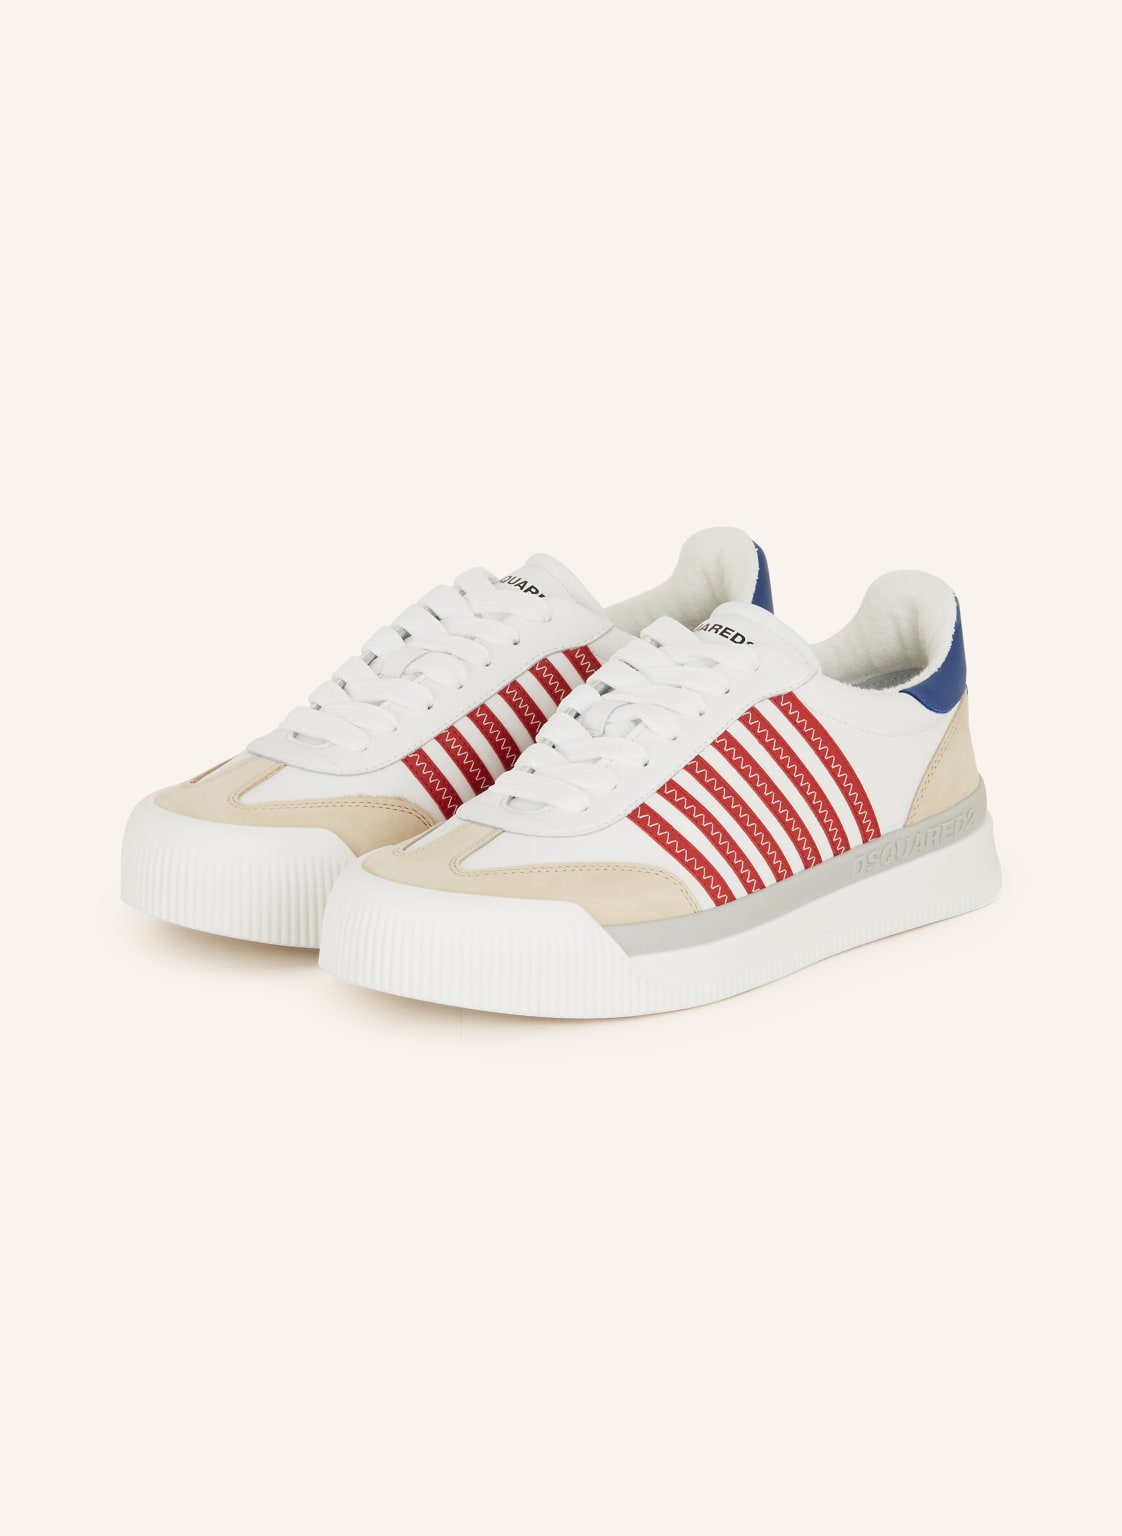 dsquared2 Sneaker New Jersey weiss von Dsquared2